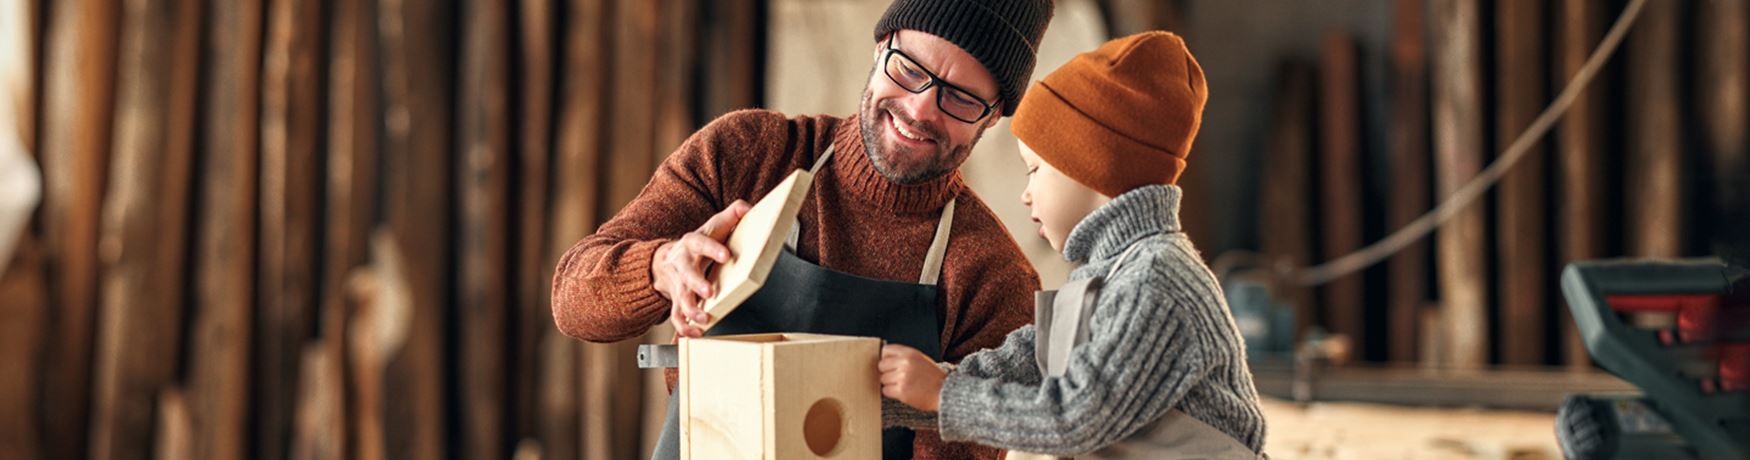 Self employed woodworker with his young son in his workshop making a birdhouse together